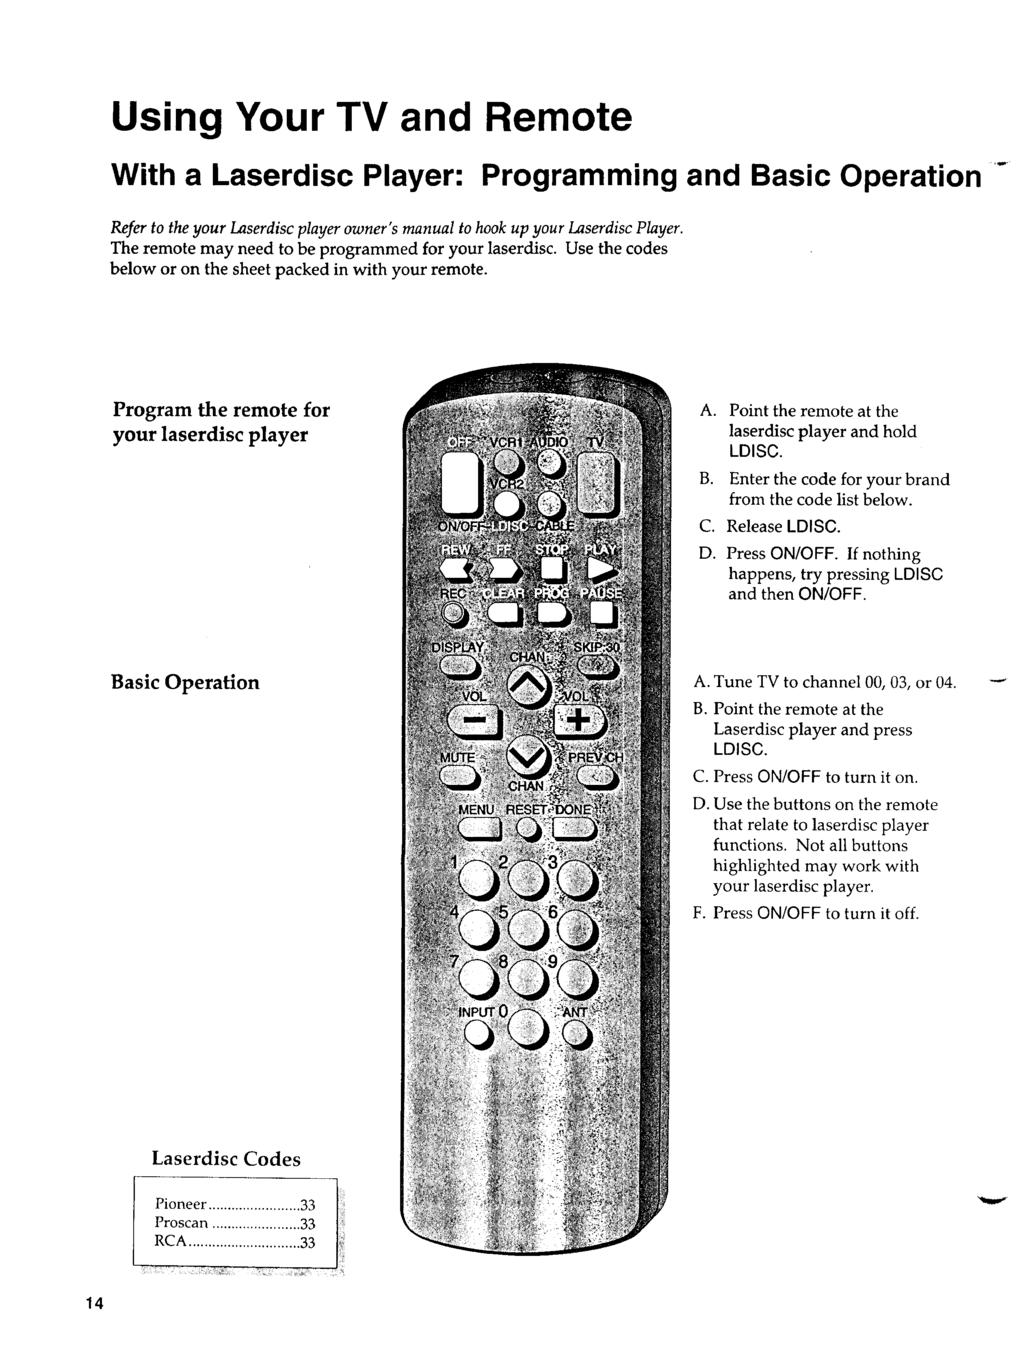 Using Your TV and Remote With a Laserdisc Player: Programming and Basic Operation Refer to the your Laserdisc player owner's manual to hook up your Laserdisc Player.